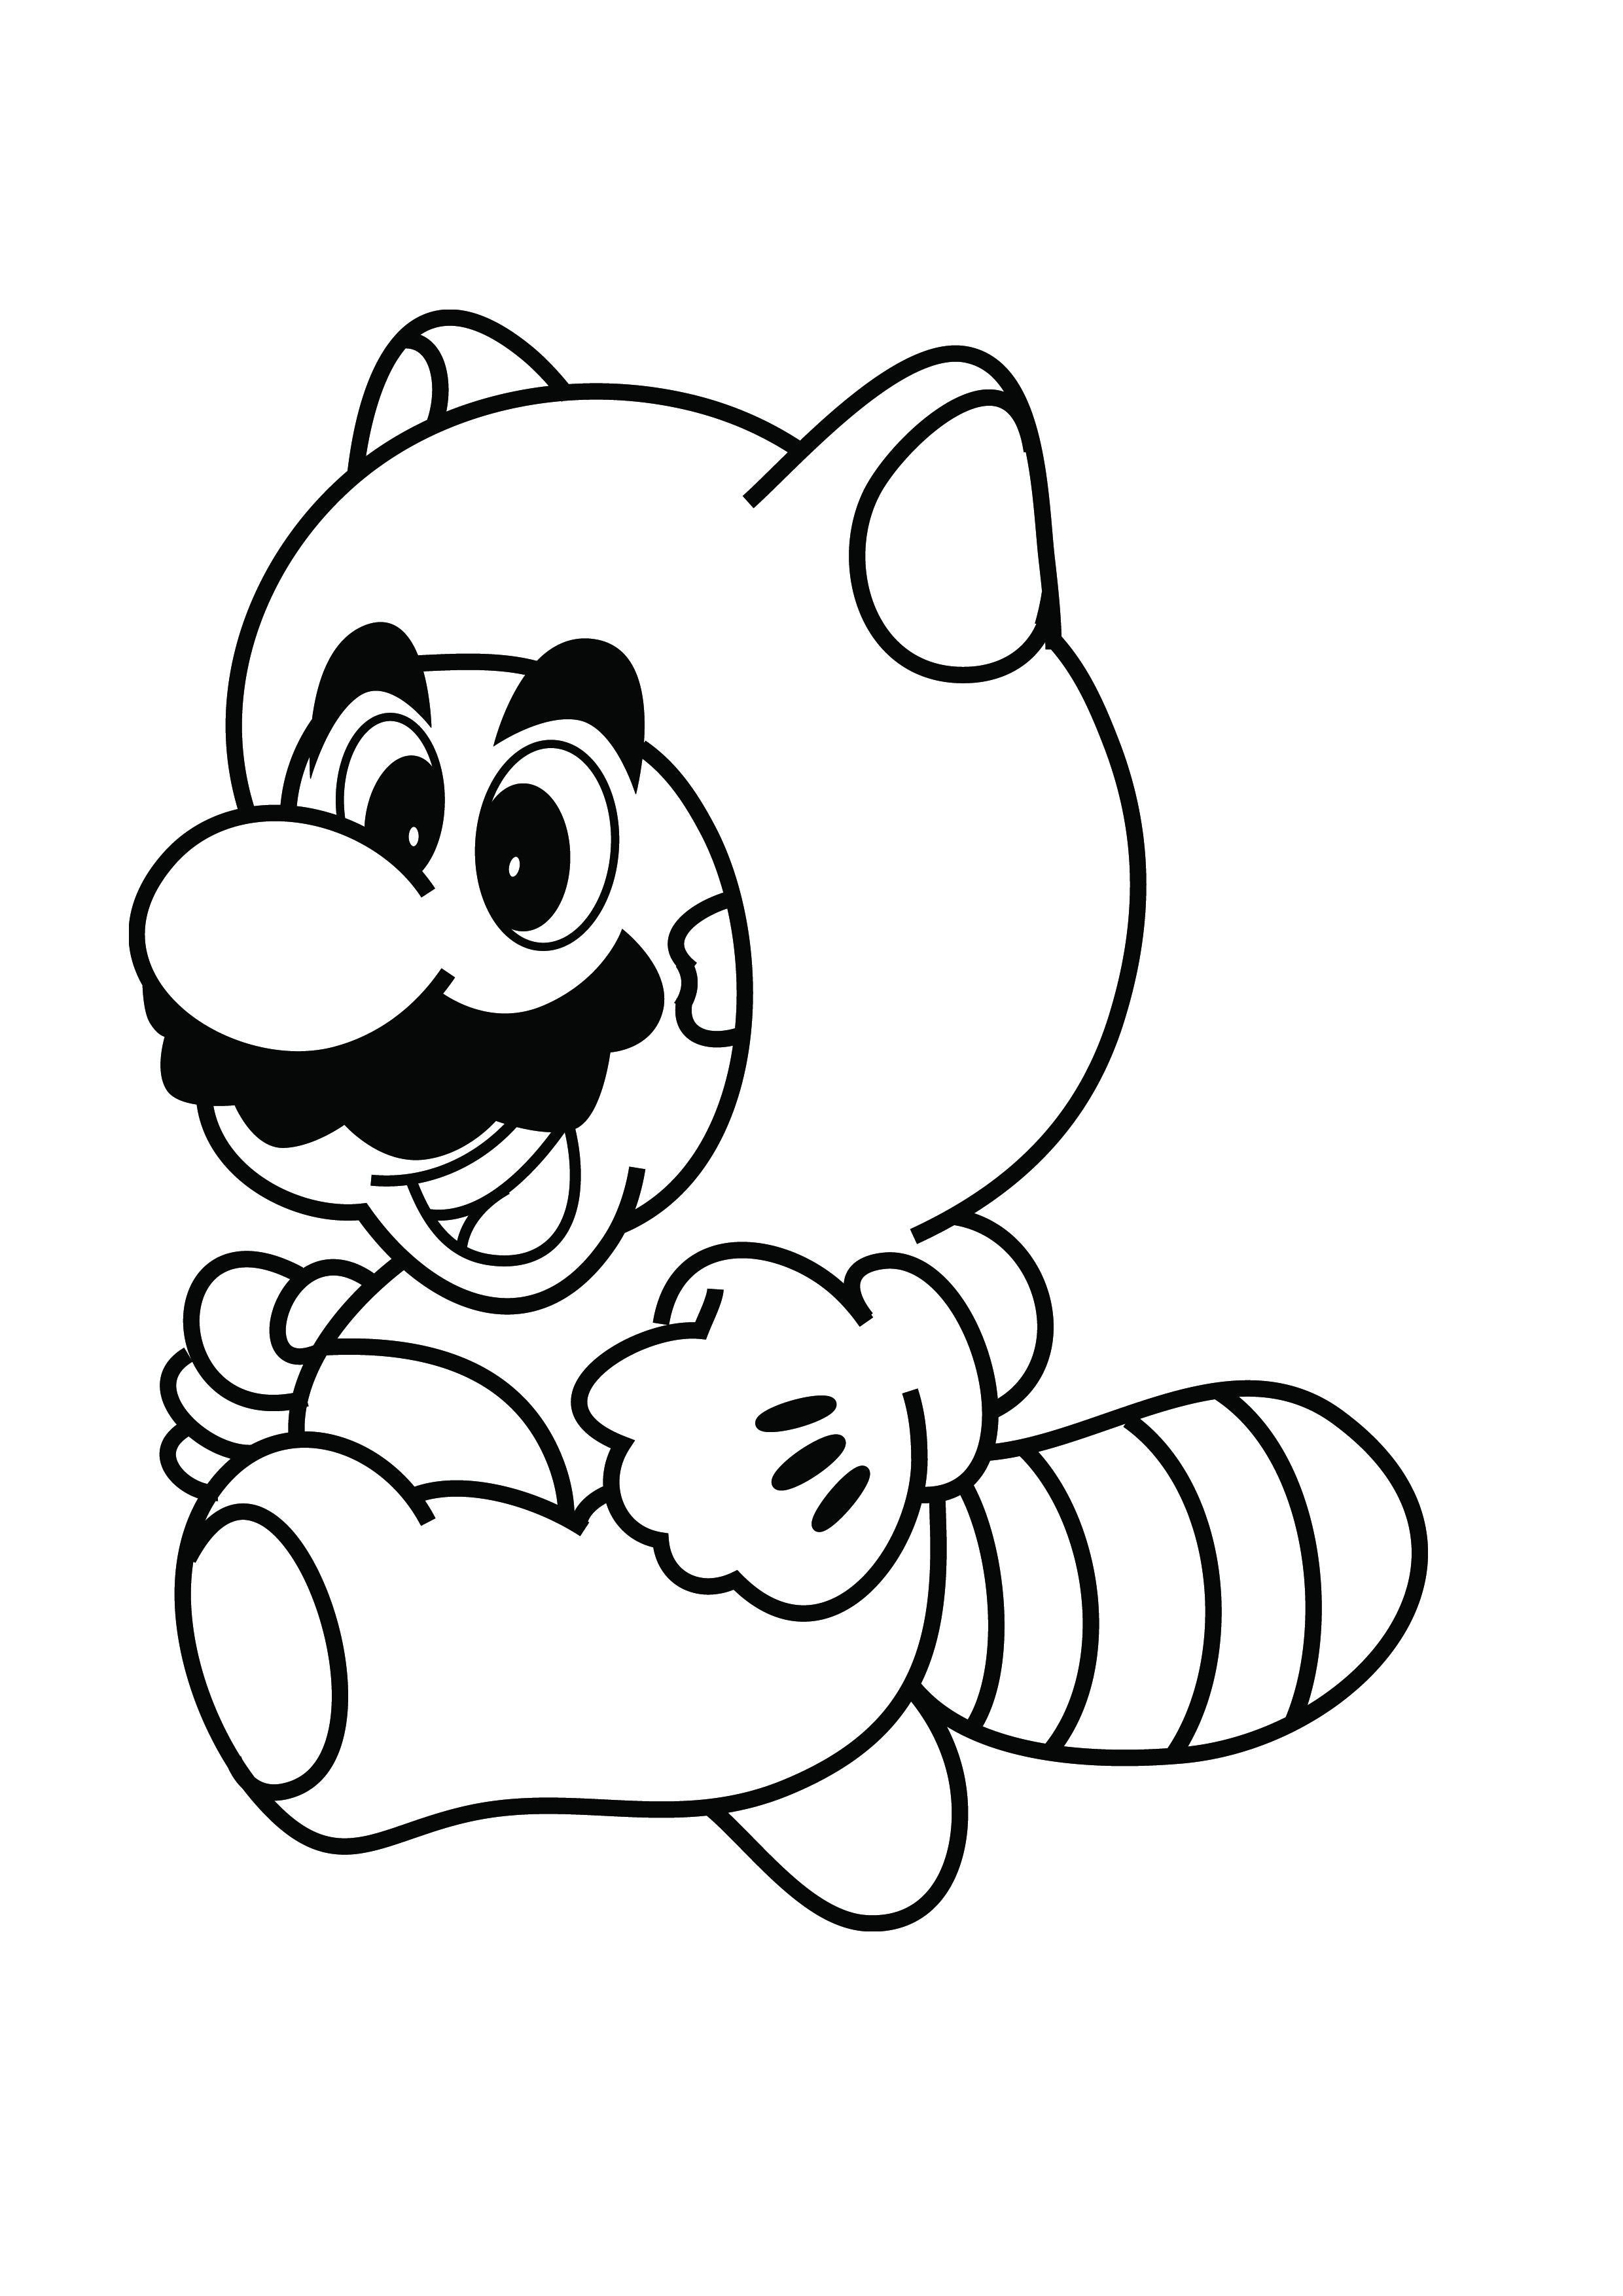 Mario Coloring Pages For Kids
 Super Mario Coloring Pages Best Coloring Pages For Kids